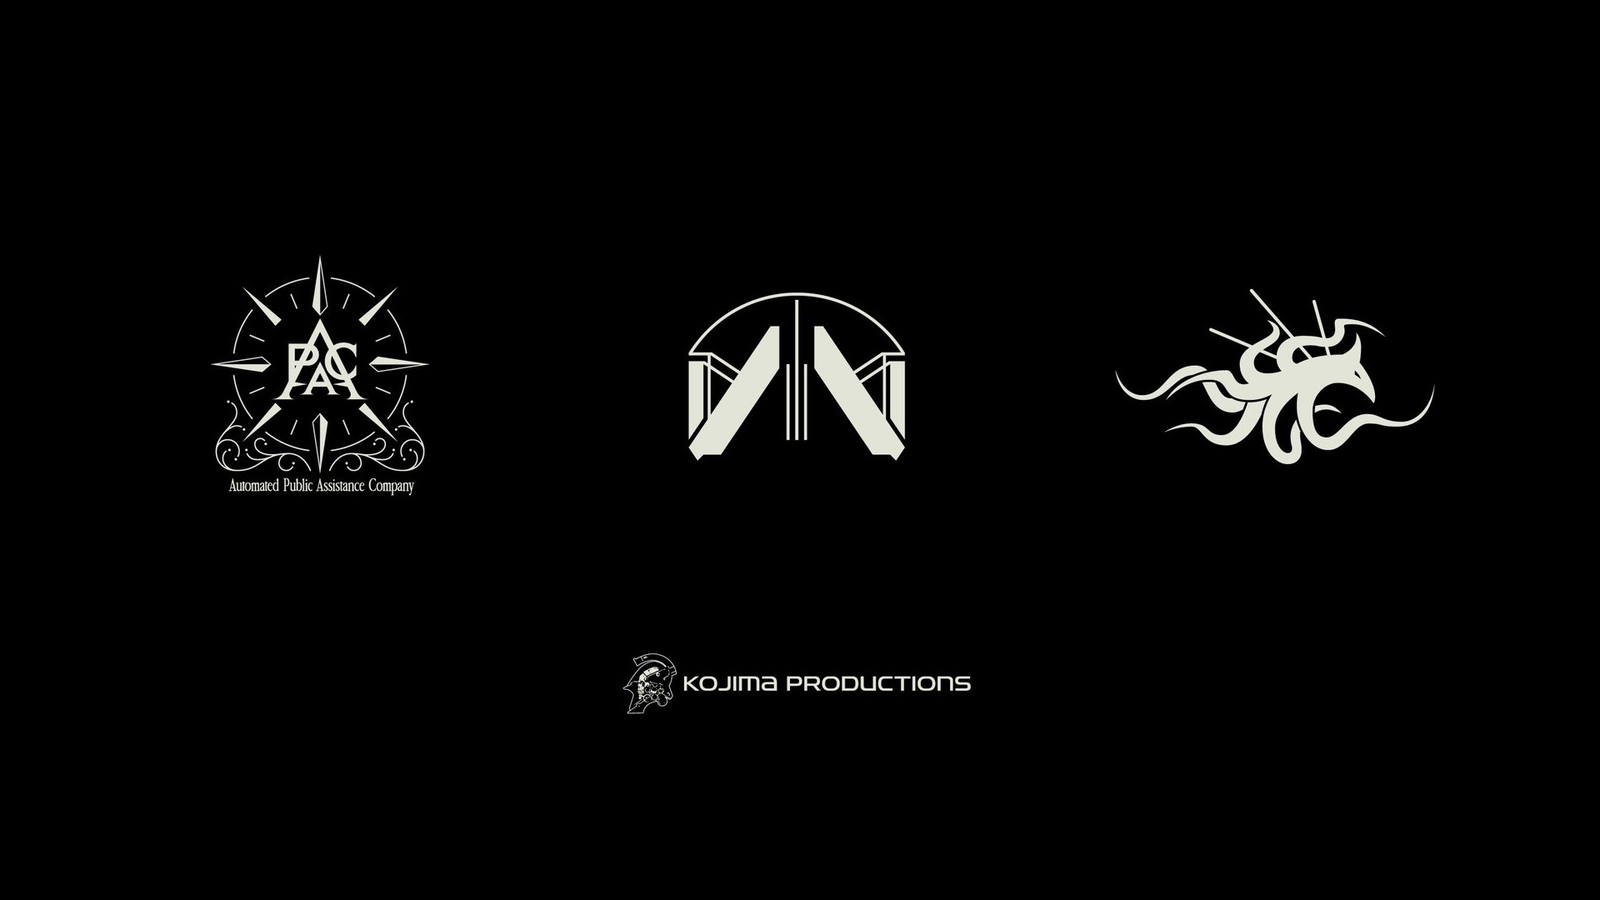 Kojima Productions Teaser Has Fans Thinking It Could Be Silent